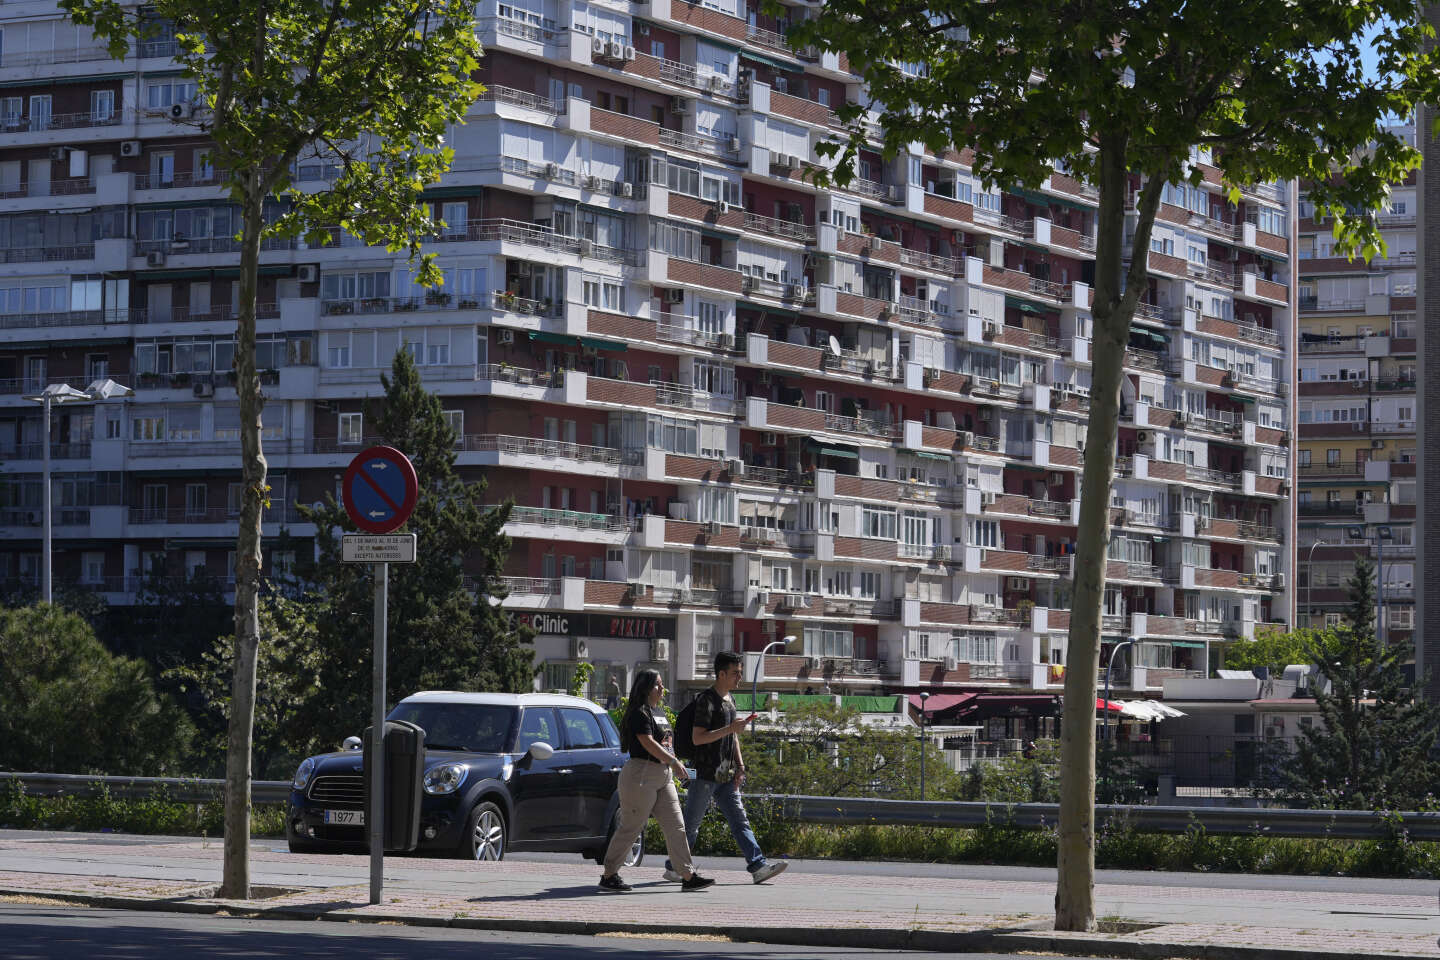 Spain and Portugal are dealing with the housing crisis